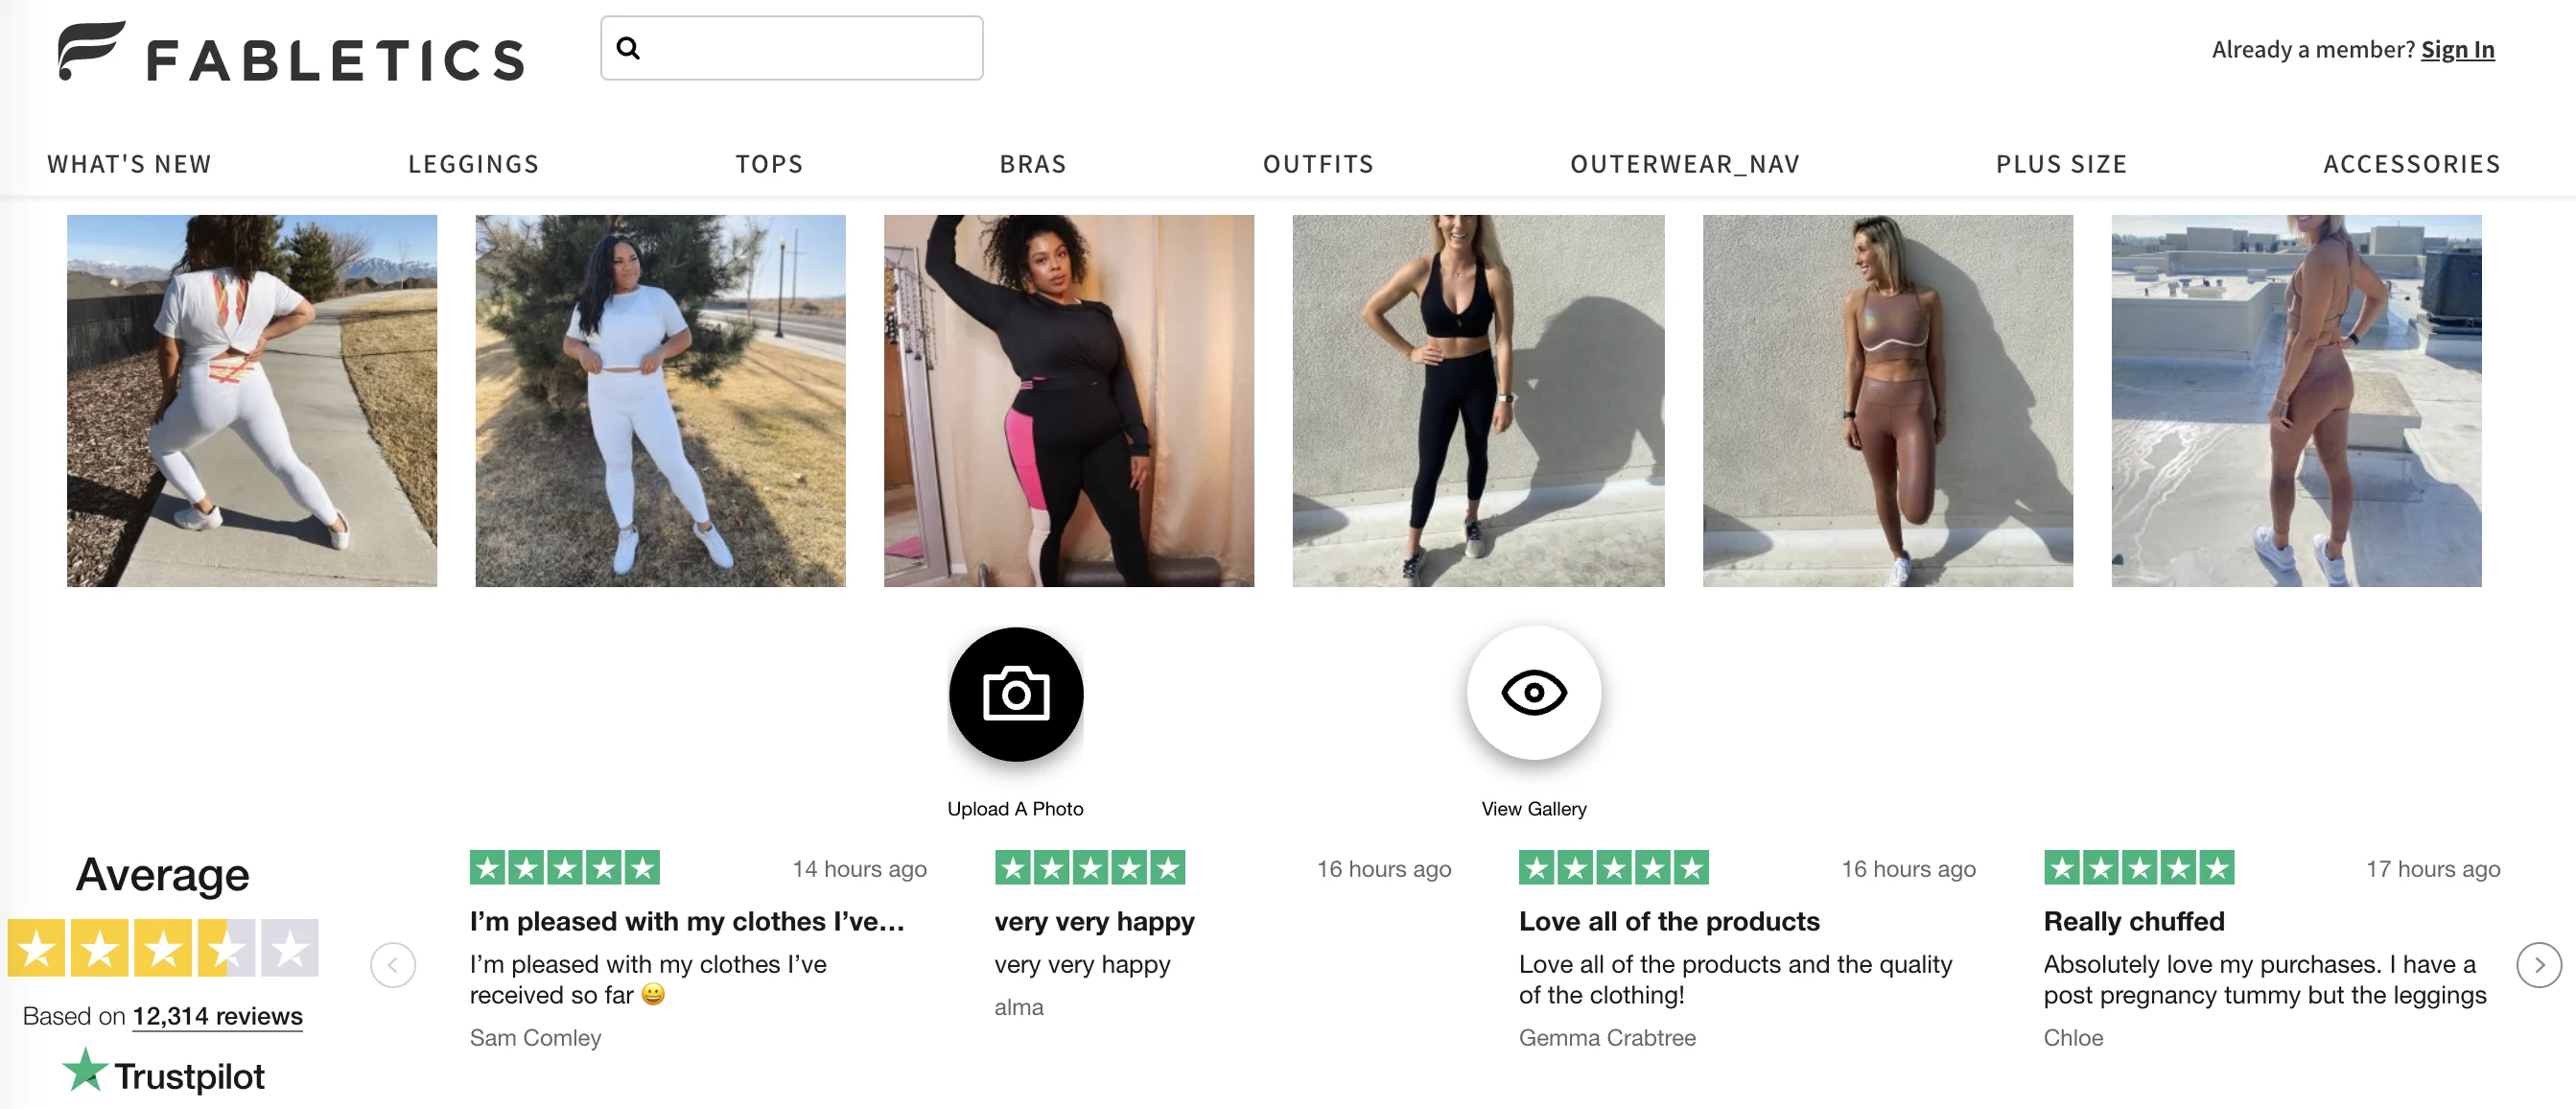 Screenshot of Fabletics page showcasing its credibility with user-generated photos and Trustpilot reviews